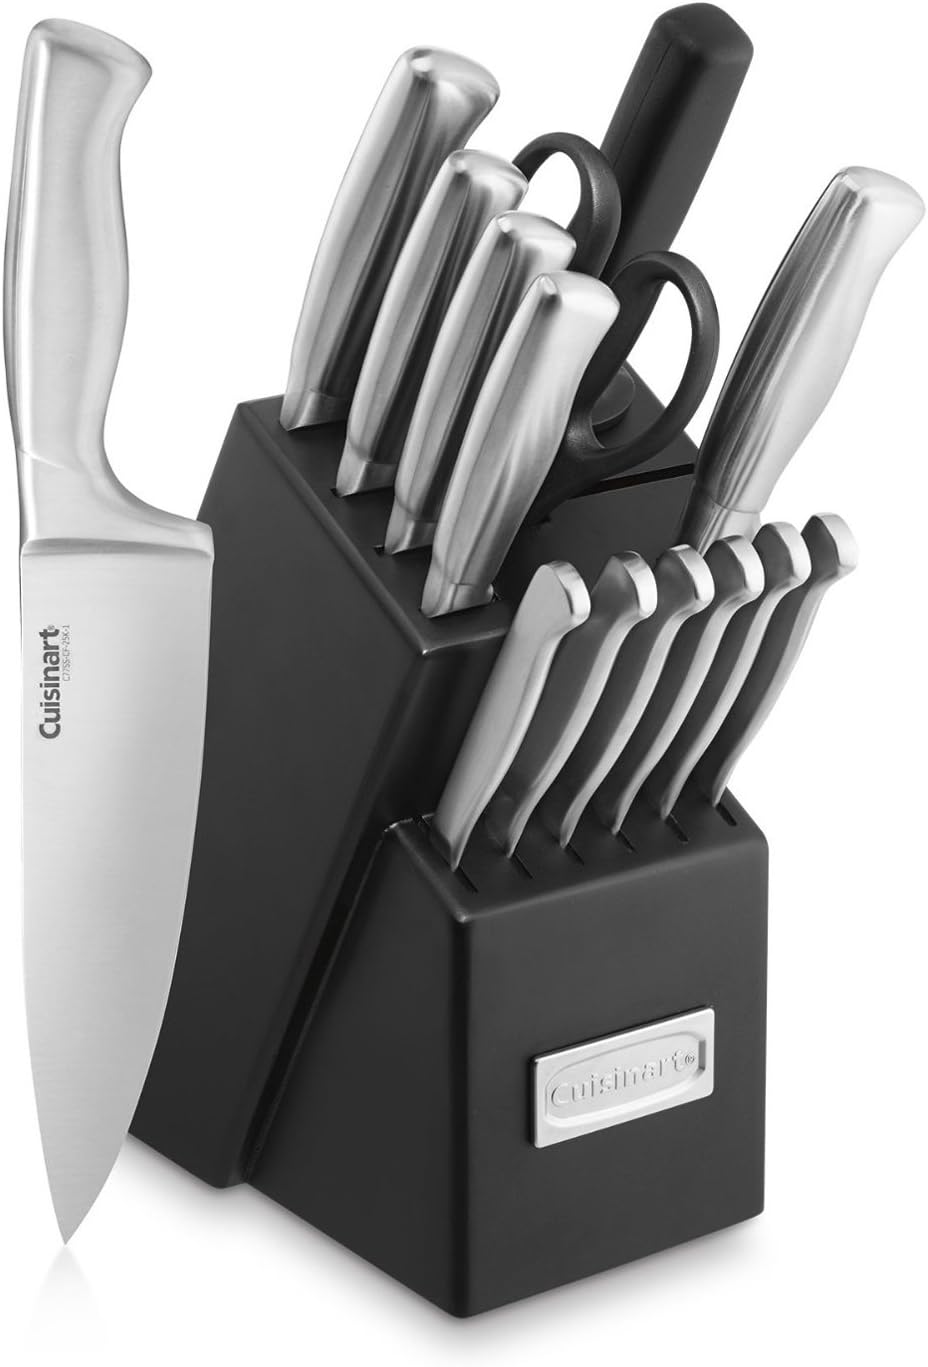 These knives are a nice set. They are very sharp and look nice on my counter :) & they have a nice grip. Every time I use them I wash and dry and put away, Keeps them in good condition!